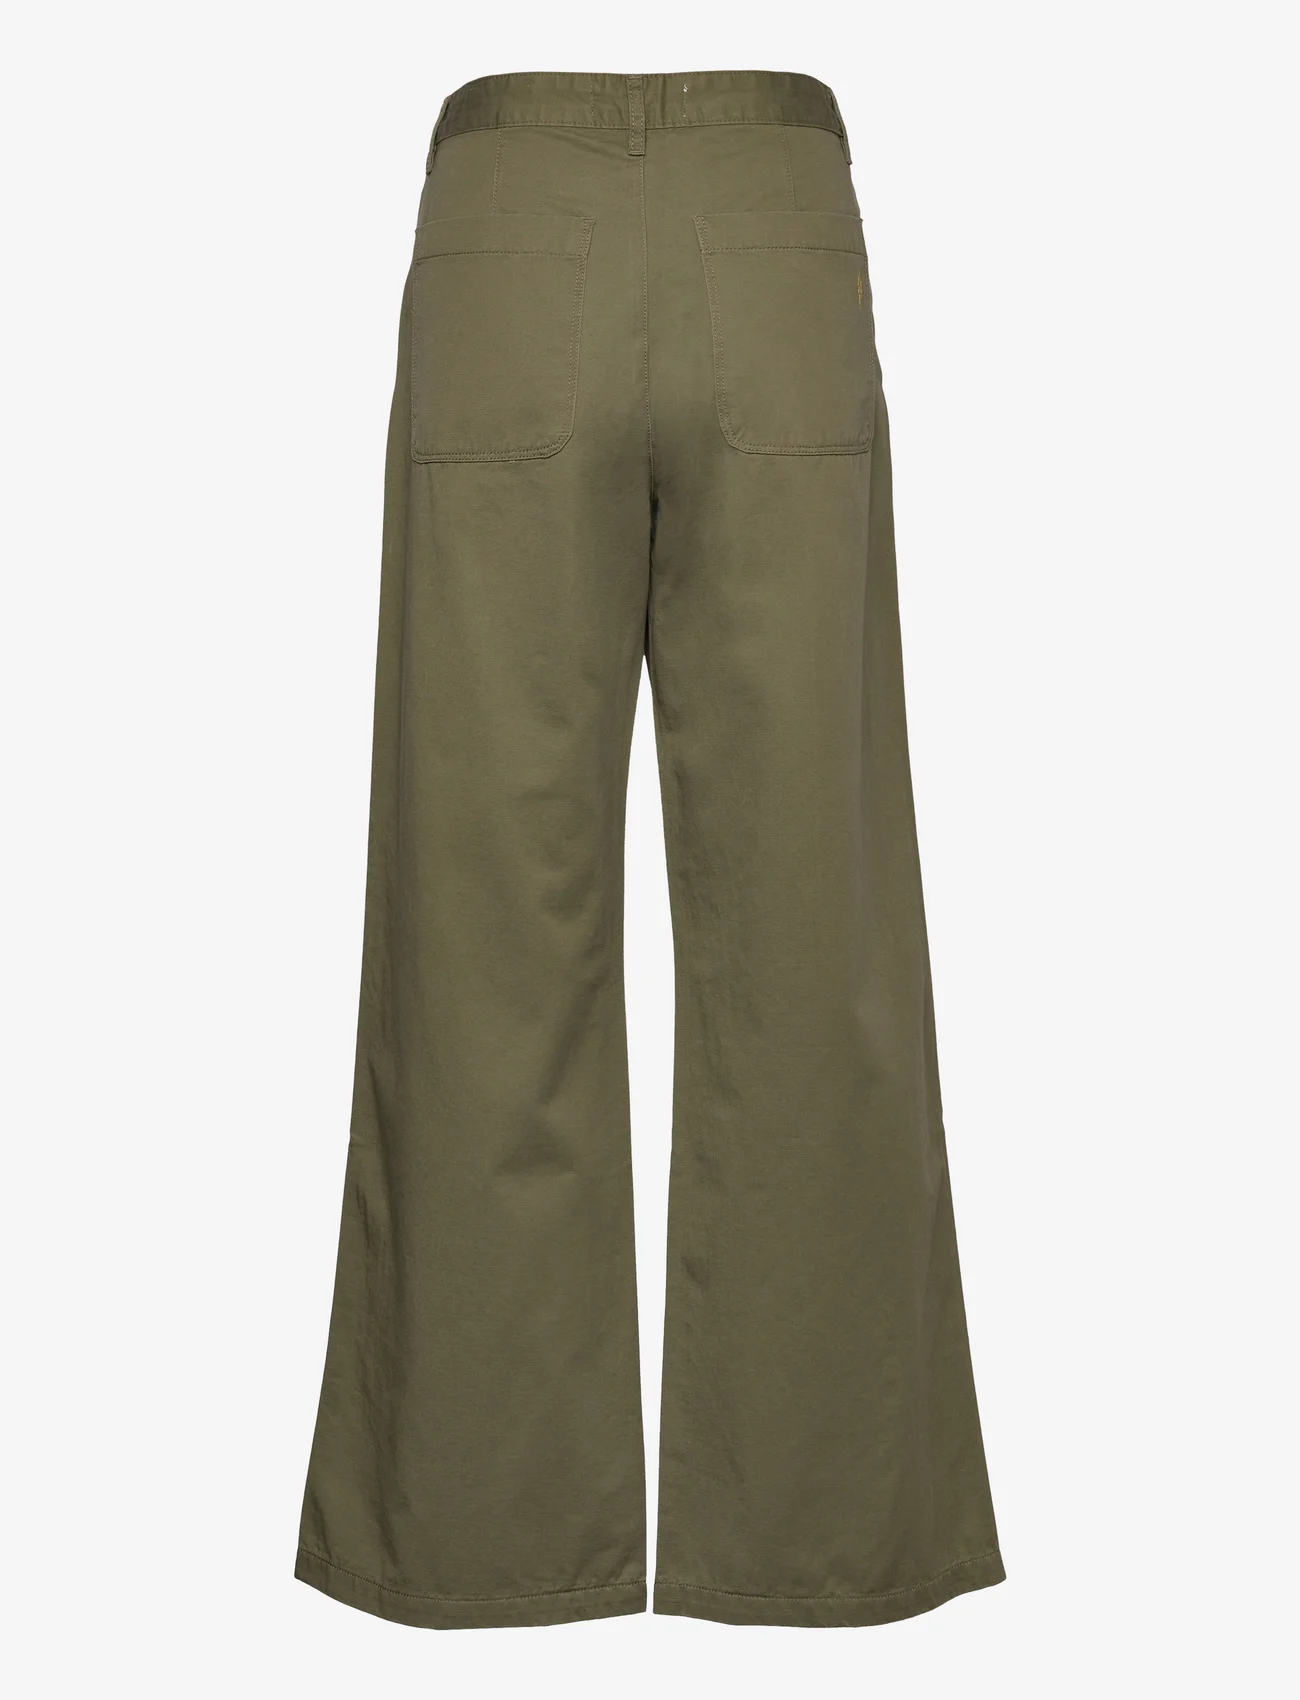 Sofie Schnoor - Trousers - chinot - army green - 1